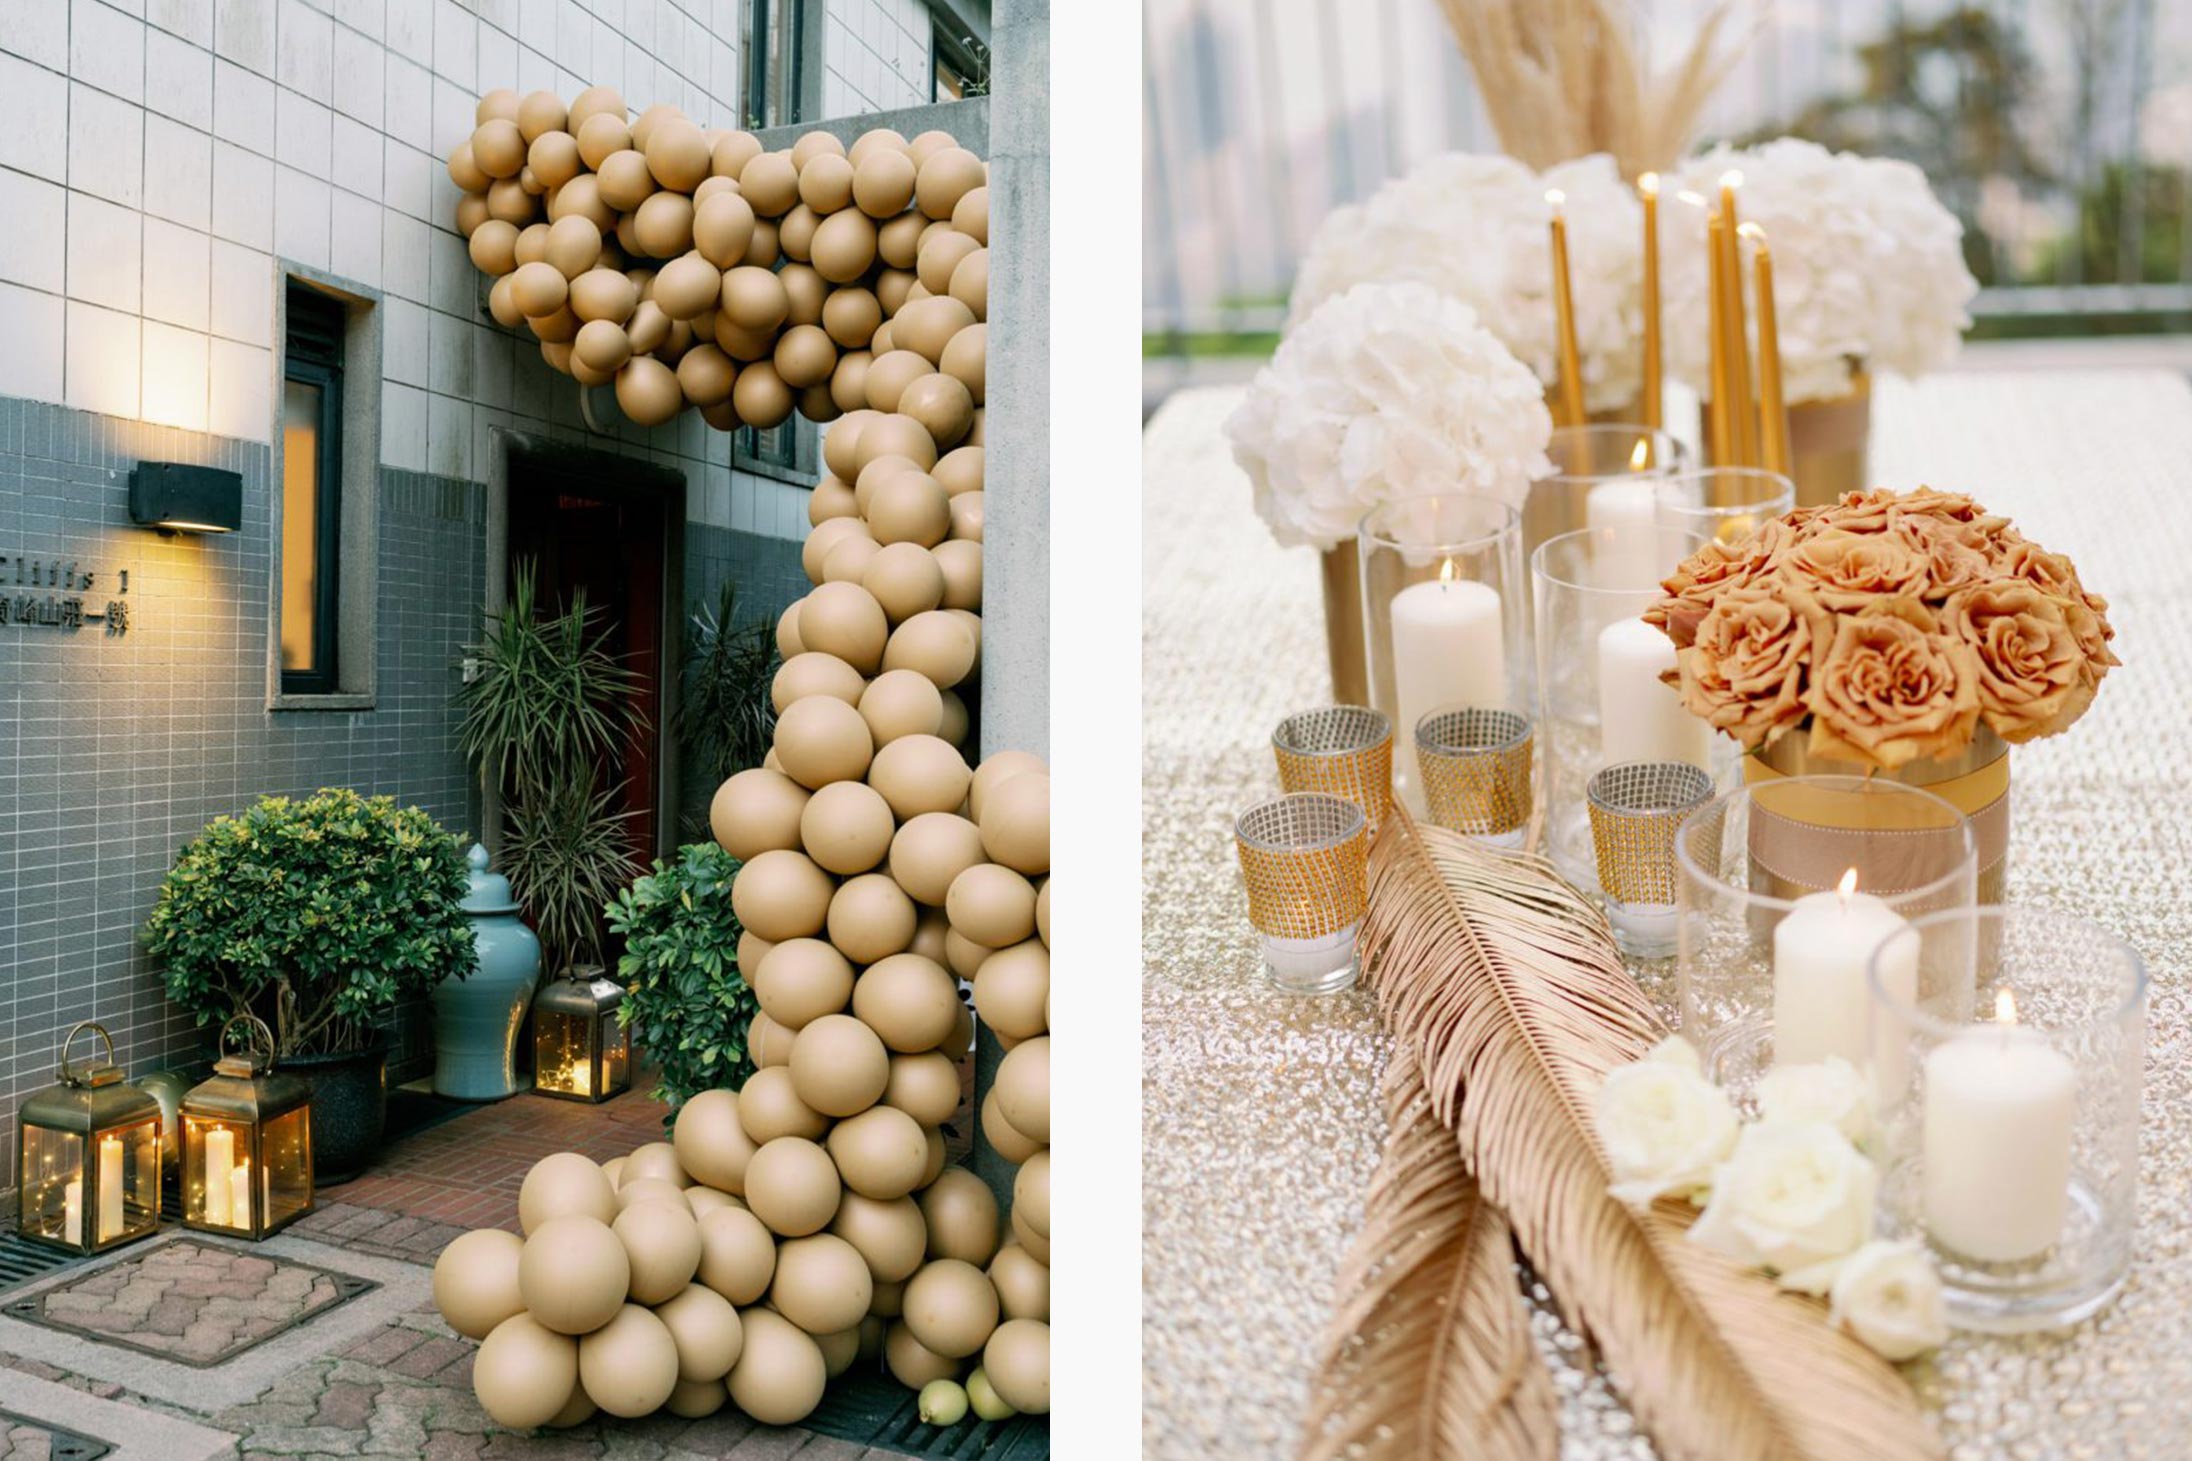 Left: Entrance to a Great Gatsby party. Right: Tablescape details